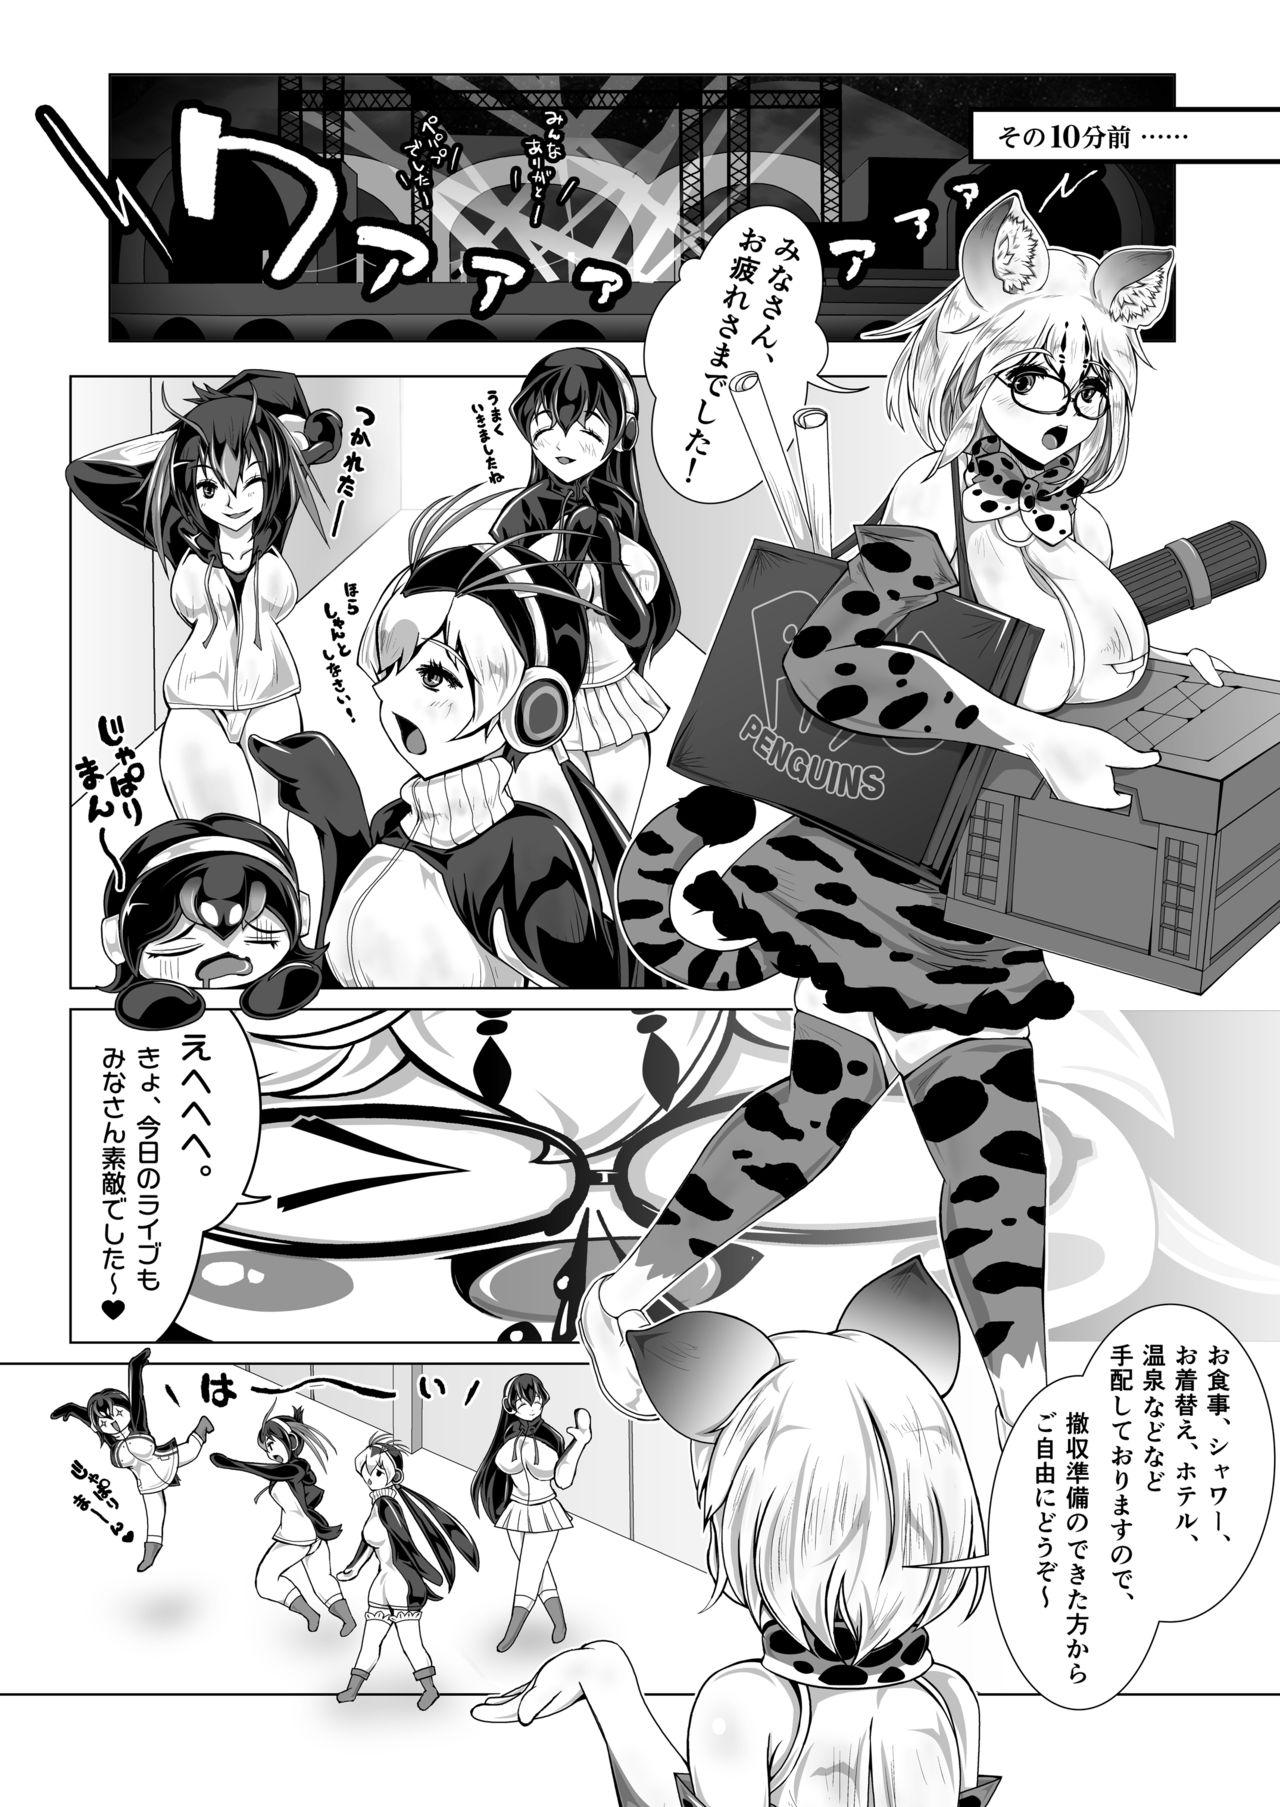 Wank Margay no PPP Management - Kemono friends Love - Page 4